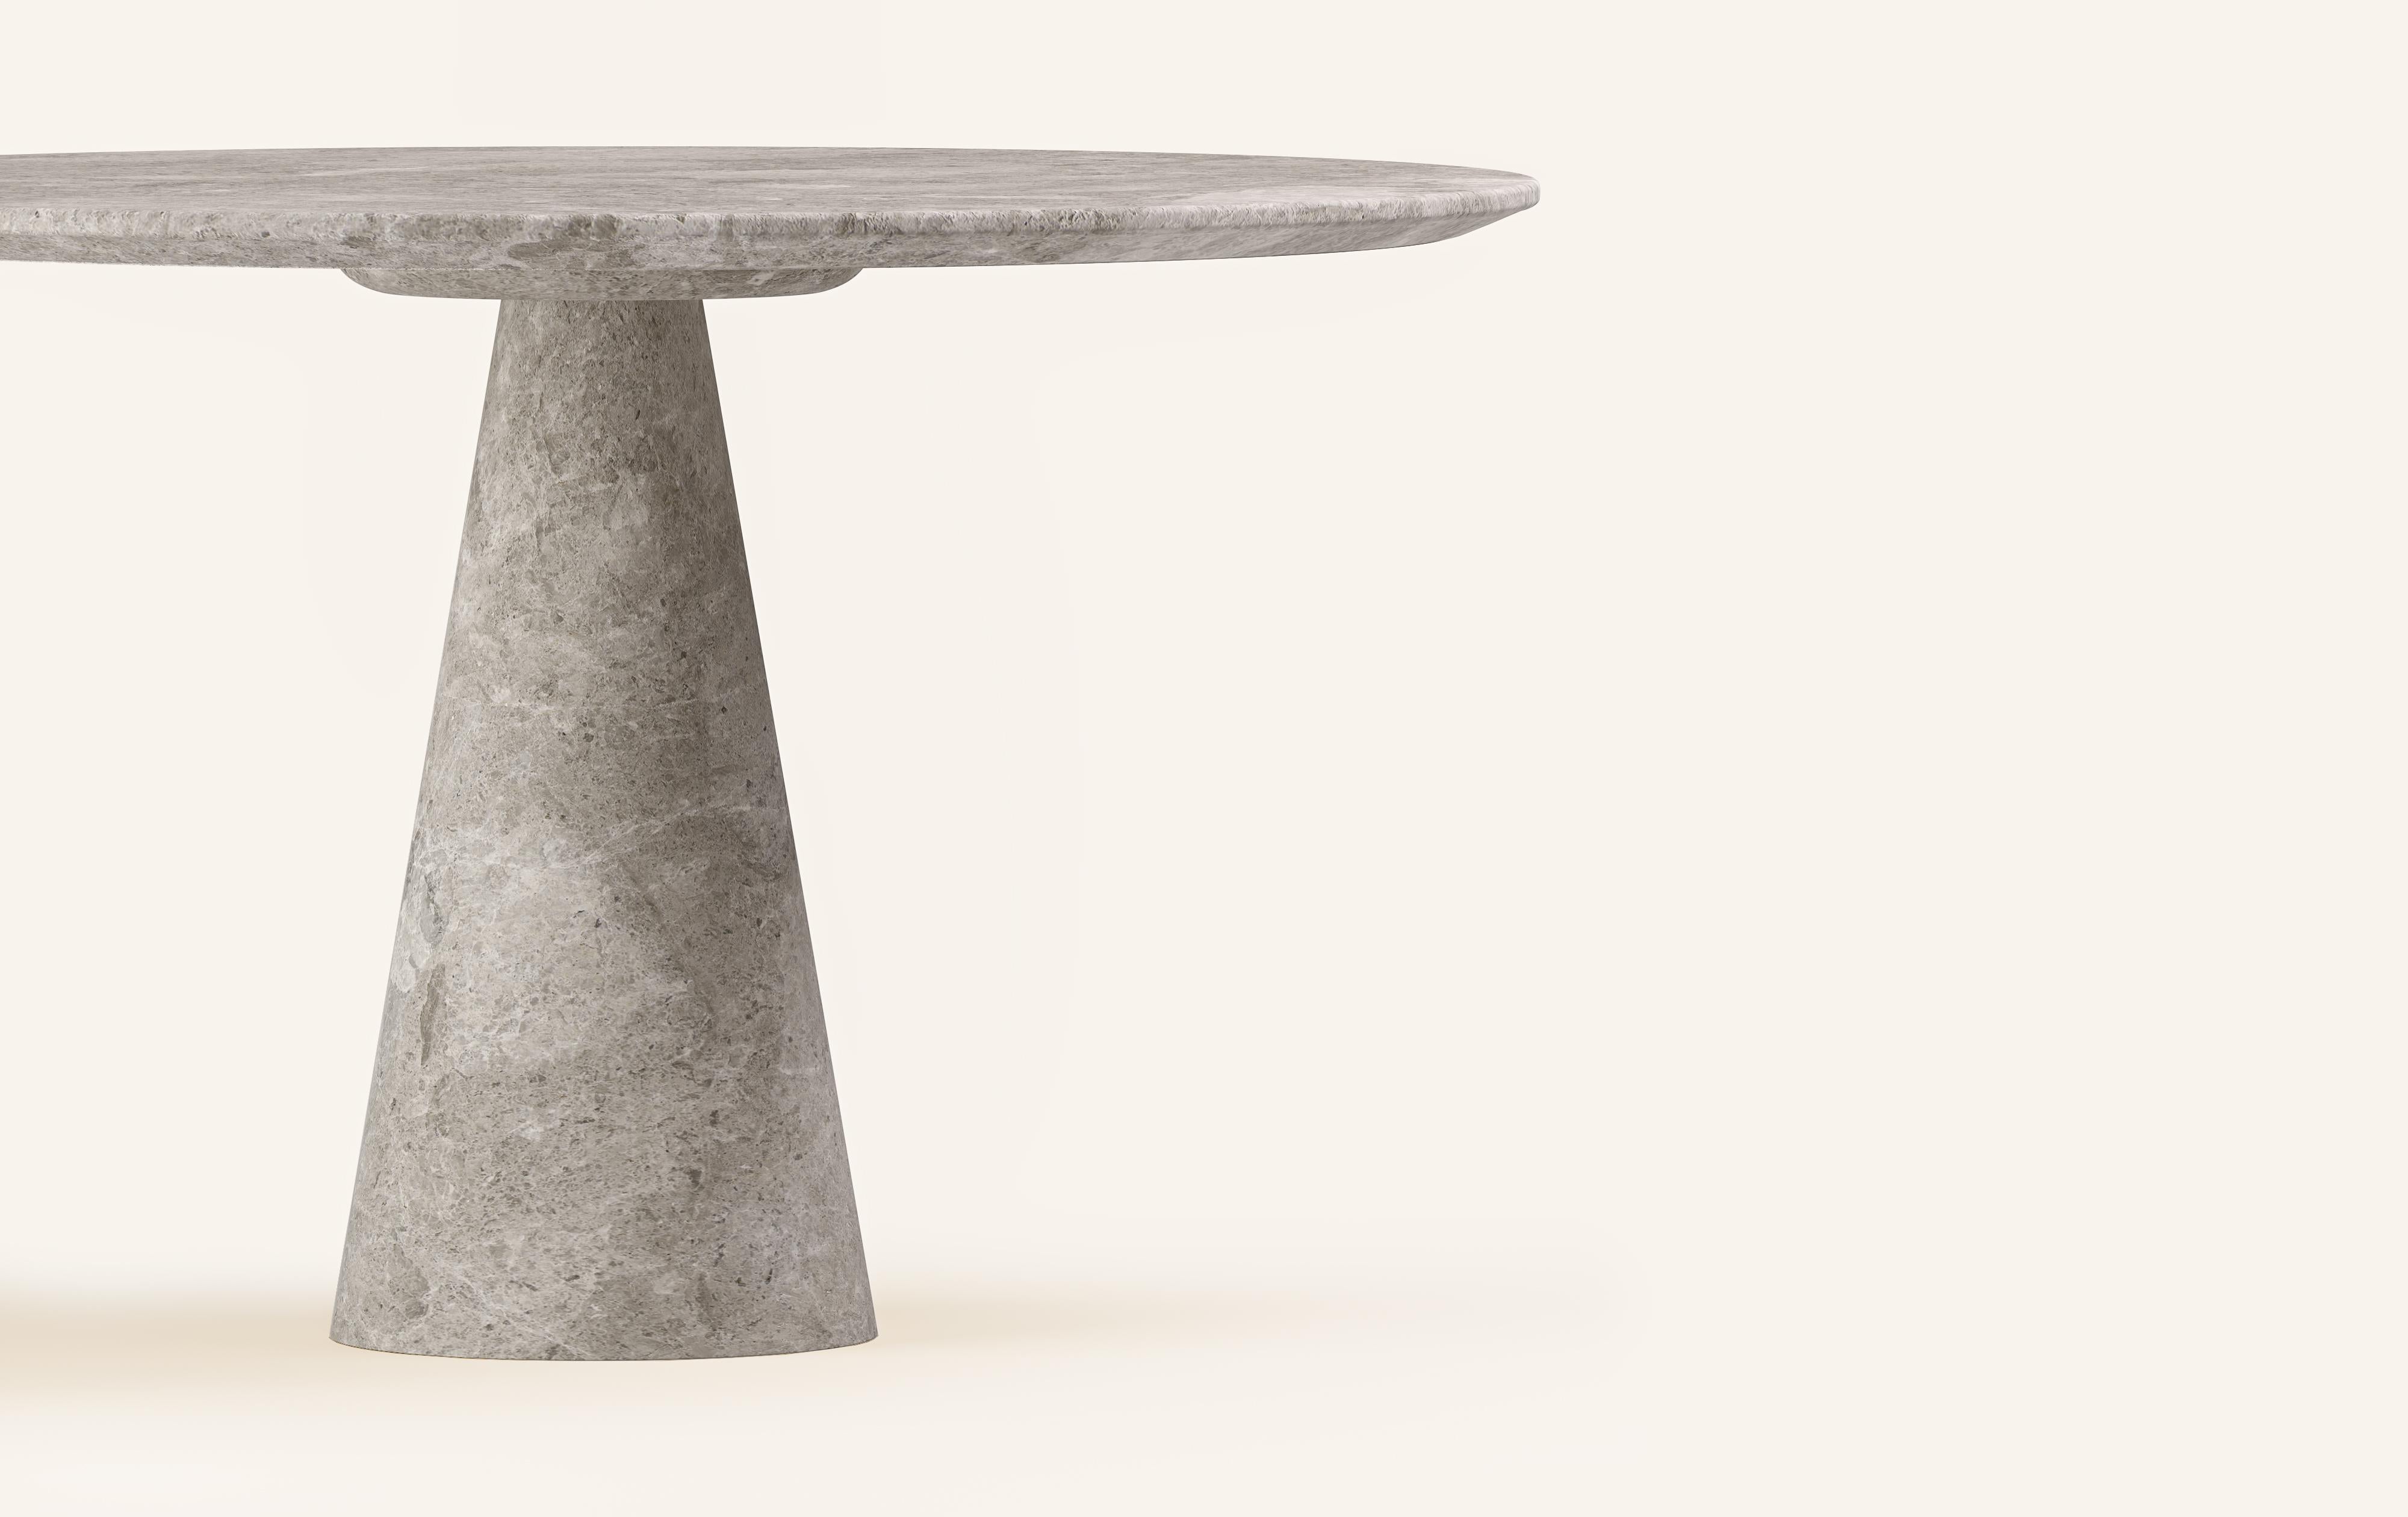 Organic Modern FORM(LA) Cono Round Dining Table 48”L x 48”W x 30”H Tundra Gray Marble For Sale